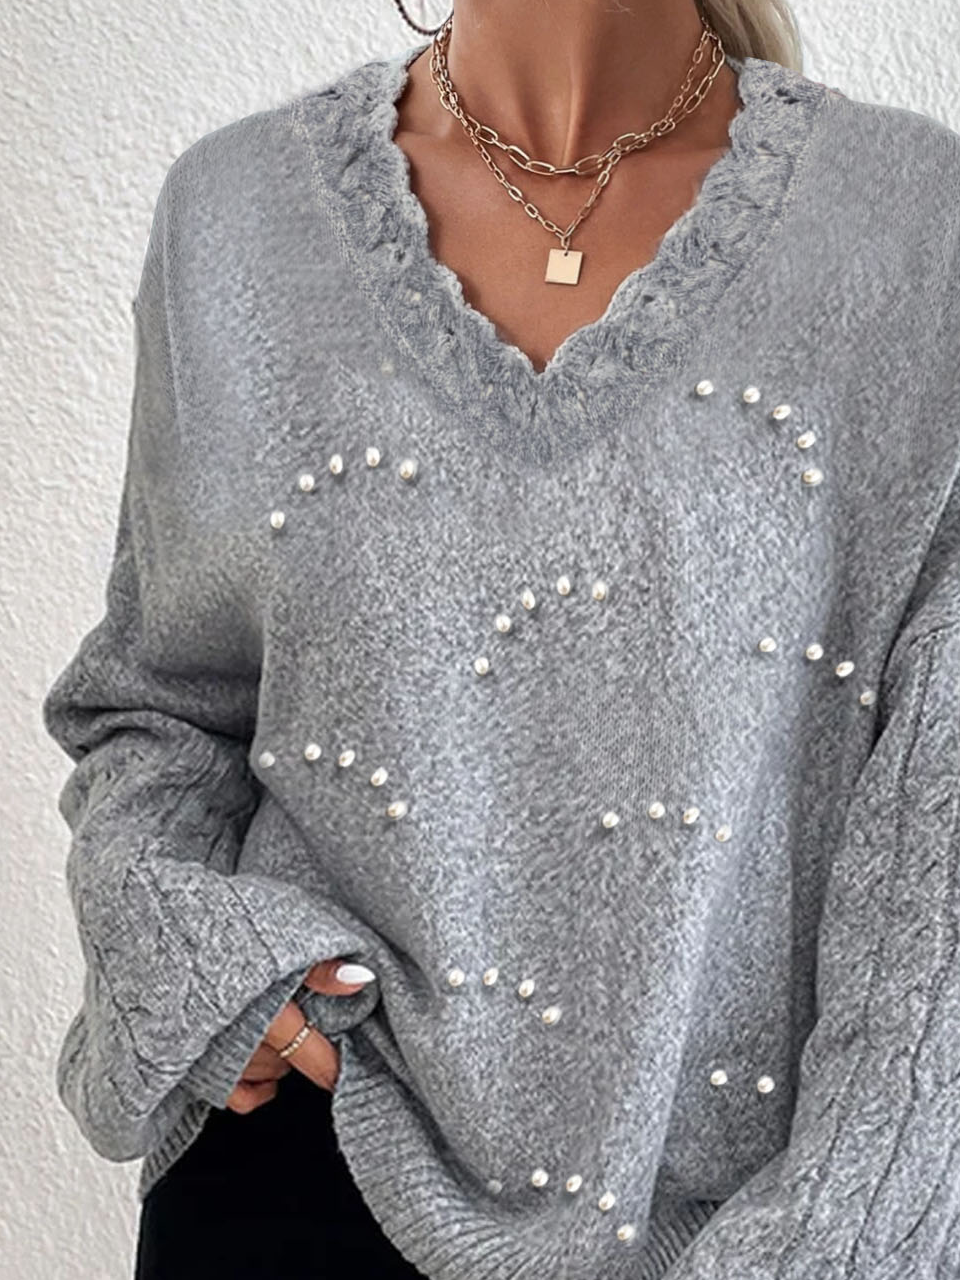 Wool/Knitting V-neck Pearl Sweater